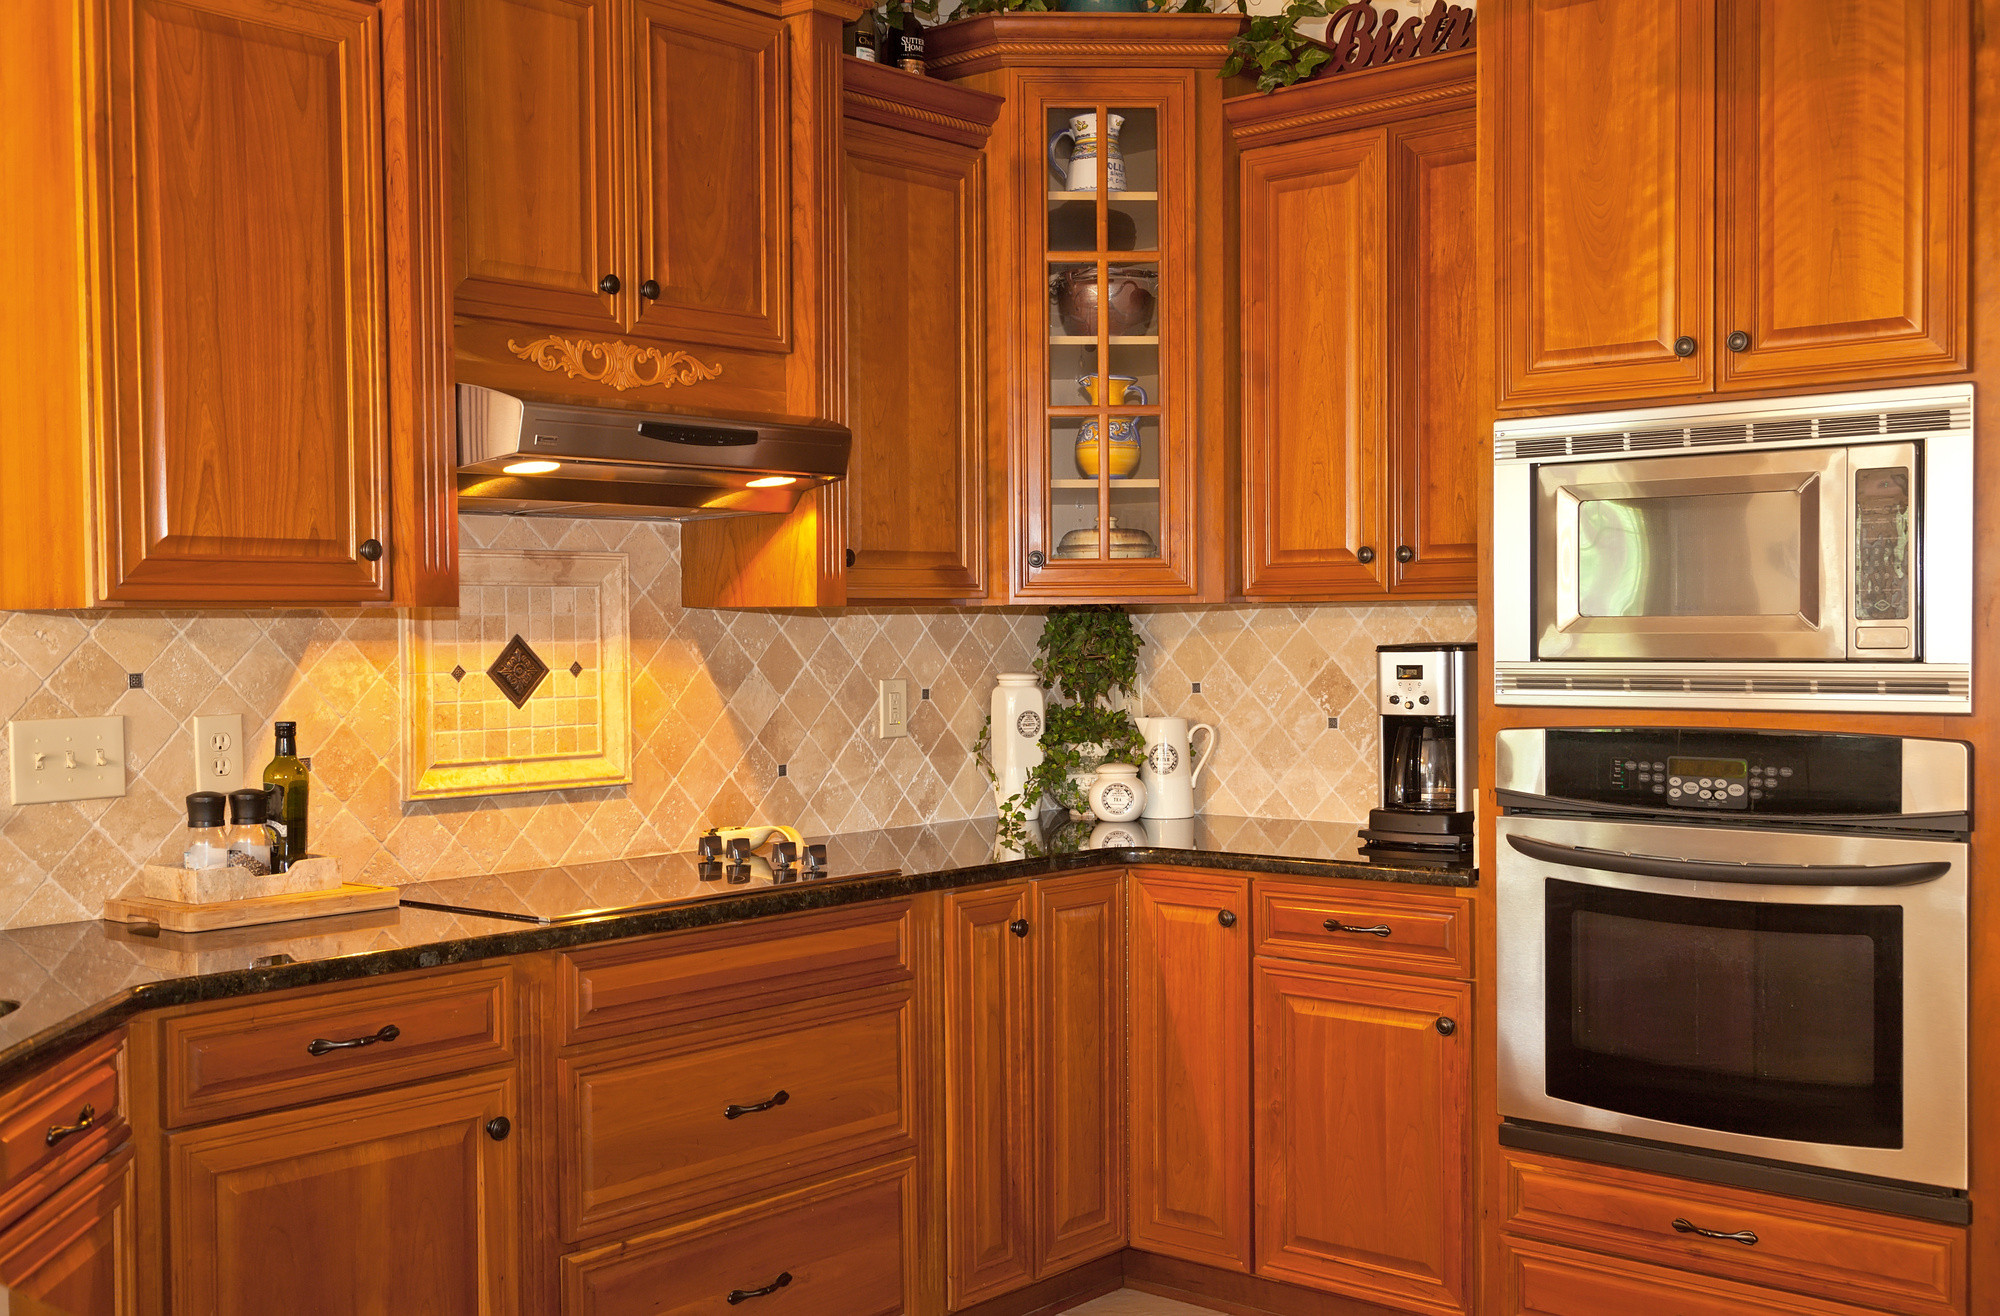 Standard Kitchen Cabinet Depths
 Kitchen Cabinet Dimensions Your Guide to the Standard Sizes